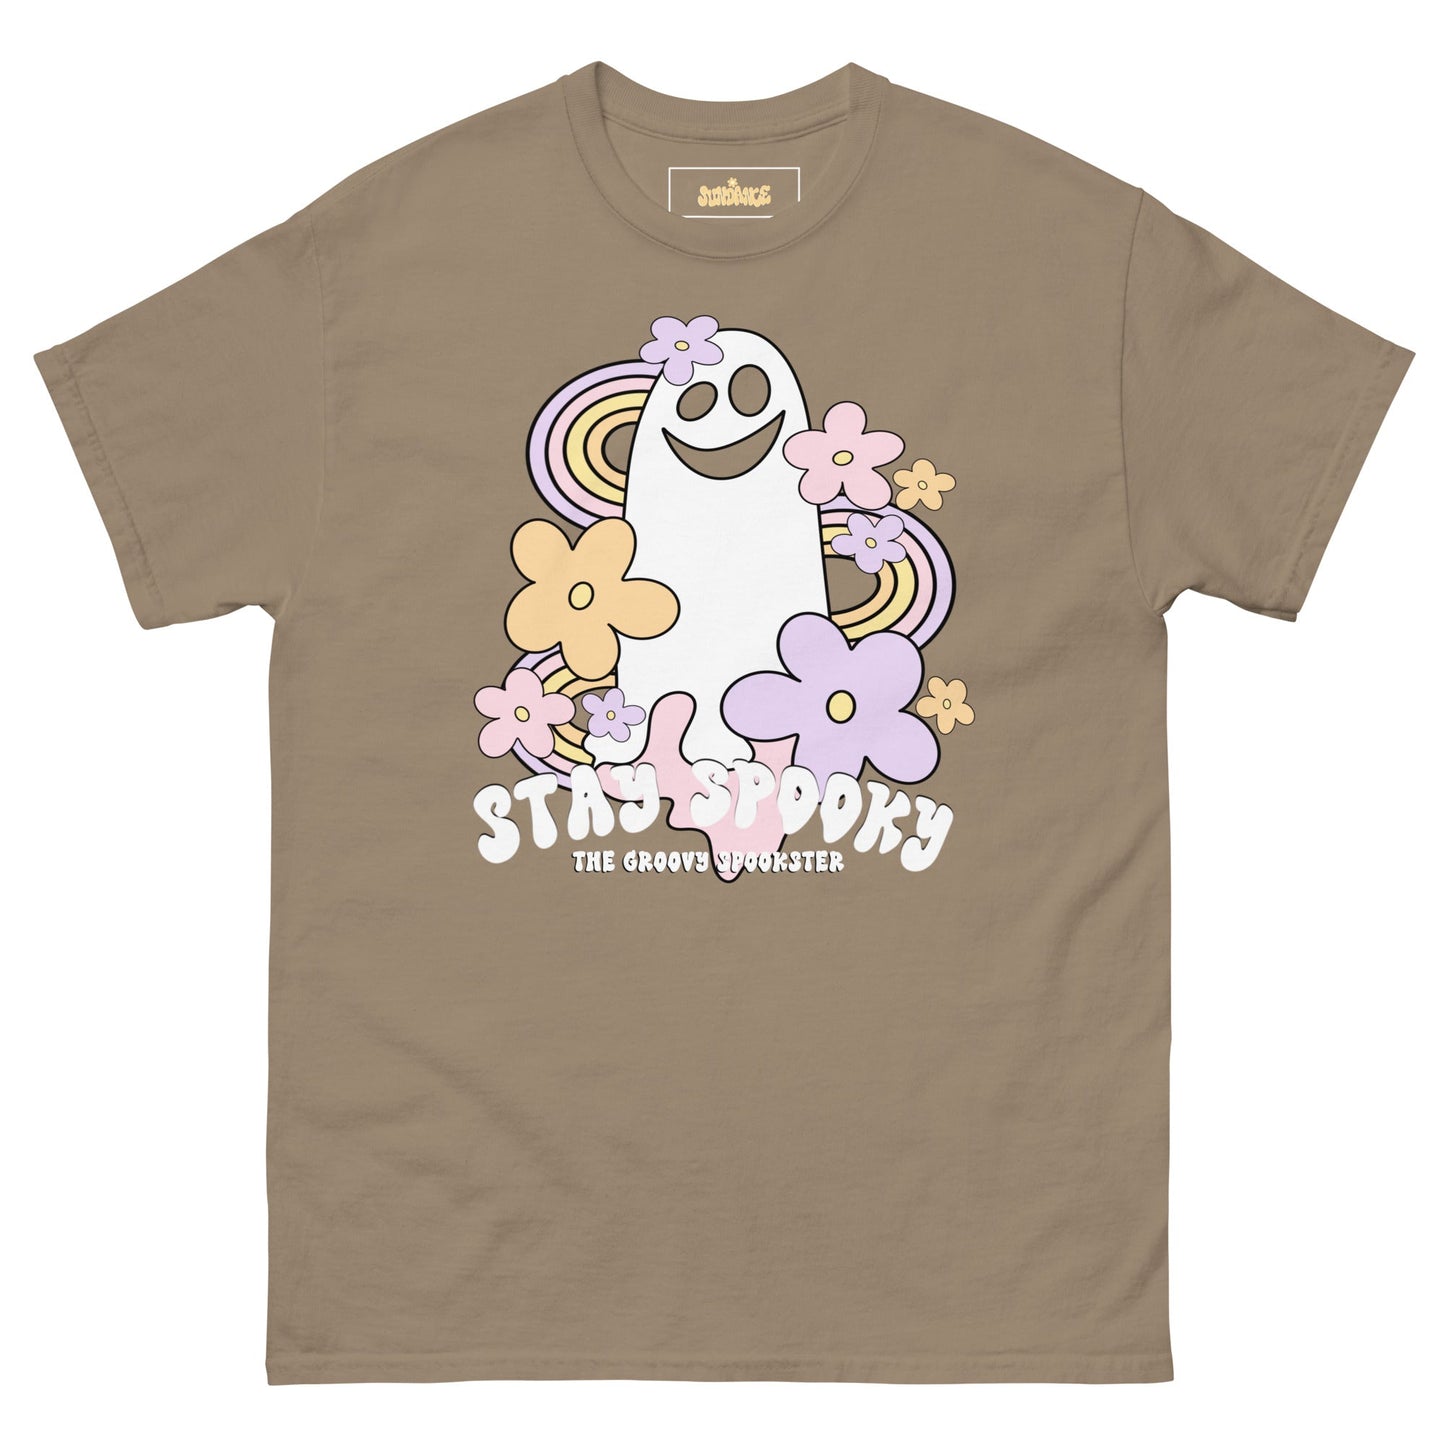 The Groovy Spookster Tee